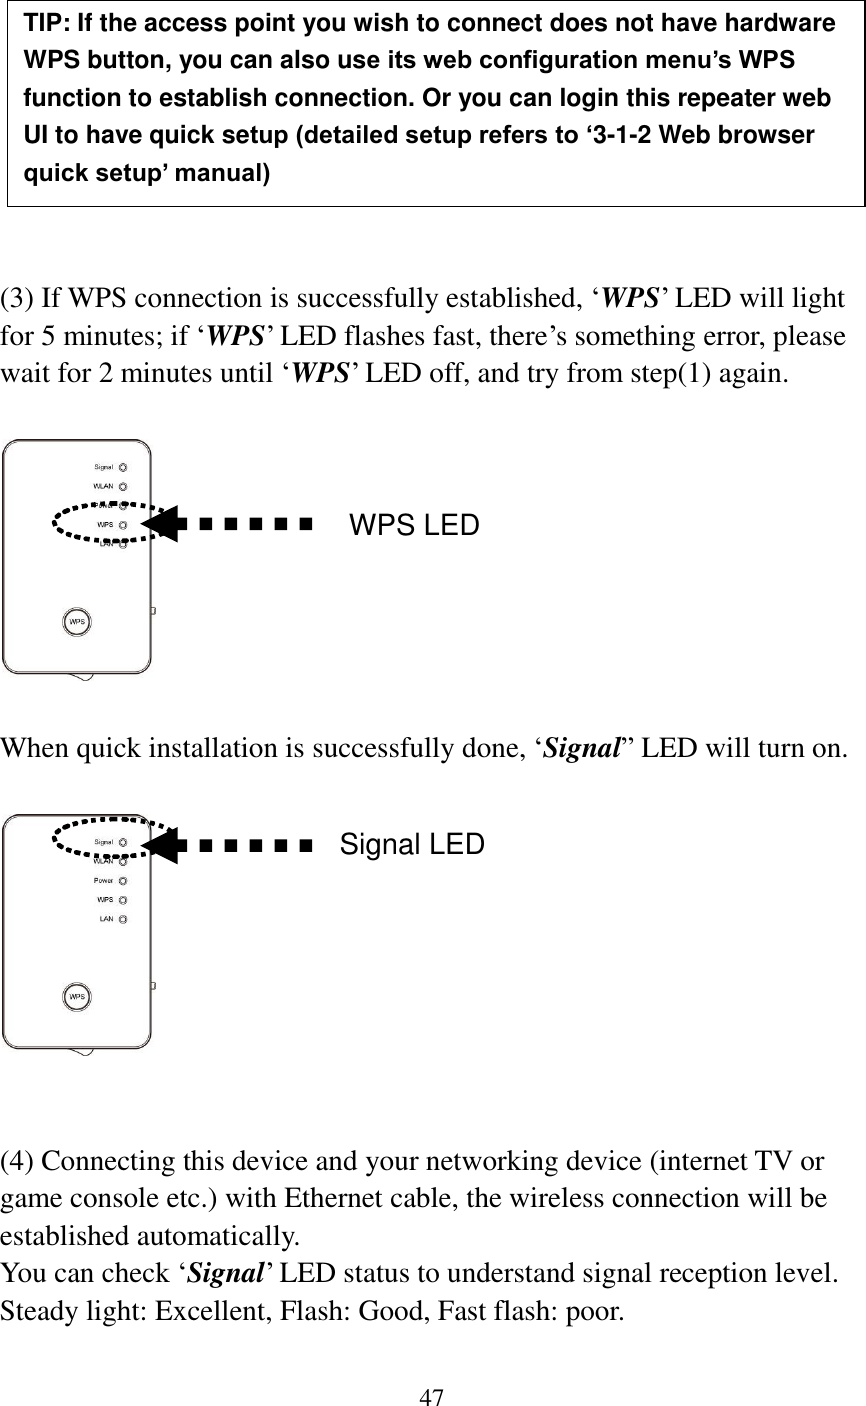 47           (3) If WPS connection is successfully established, „WPS‟ LED will light for 5 minutes; if „WPS‟ LED flashes fast, there‟s something error, please wait for 2 minutes until „WPS‟ LED off, and try from step(1) again.      When quick installation is successfully done, „Signal” LED will turn on.     (4) Connecting this device and your networking device (internet TV or game console etc.) with Ethernet cable, the wireless connection will be established automatically.   You can check „Signal‟ LED status to understand signal reception level.   Steady light: Excellent, Flash: Good, Fast flash: poor.  TIP: If the access point you wish to connect does not have hardware WPS button, you can also use its web configuration menu’s WPS function to establish connection. Or you can login this repeater web UI to have quick setup (detailed setup refers to ‘3-1-2 Web browser quick setup’ manual)   manual)  WPS LED Signal LED 